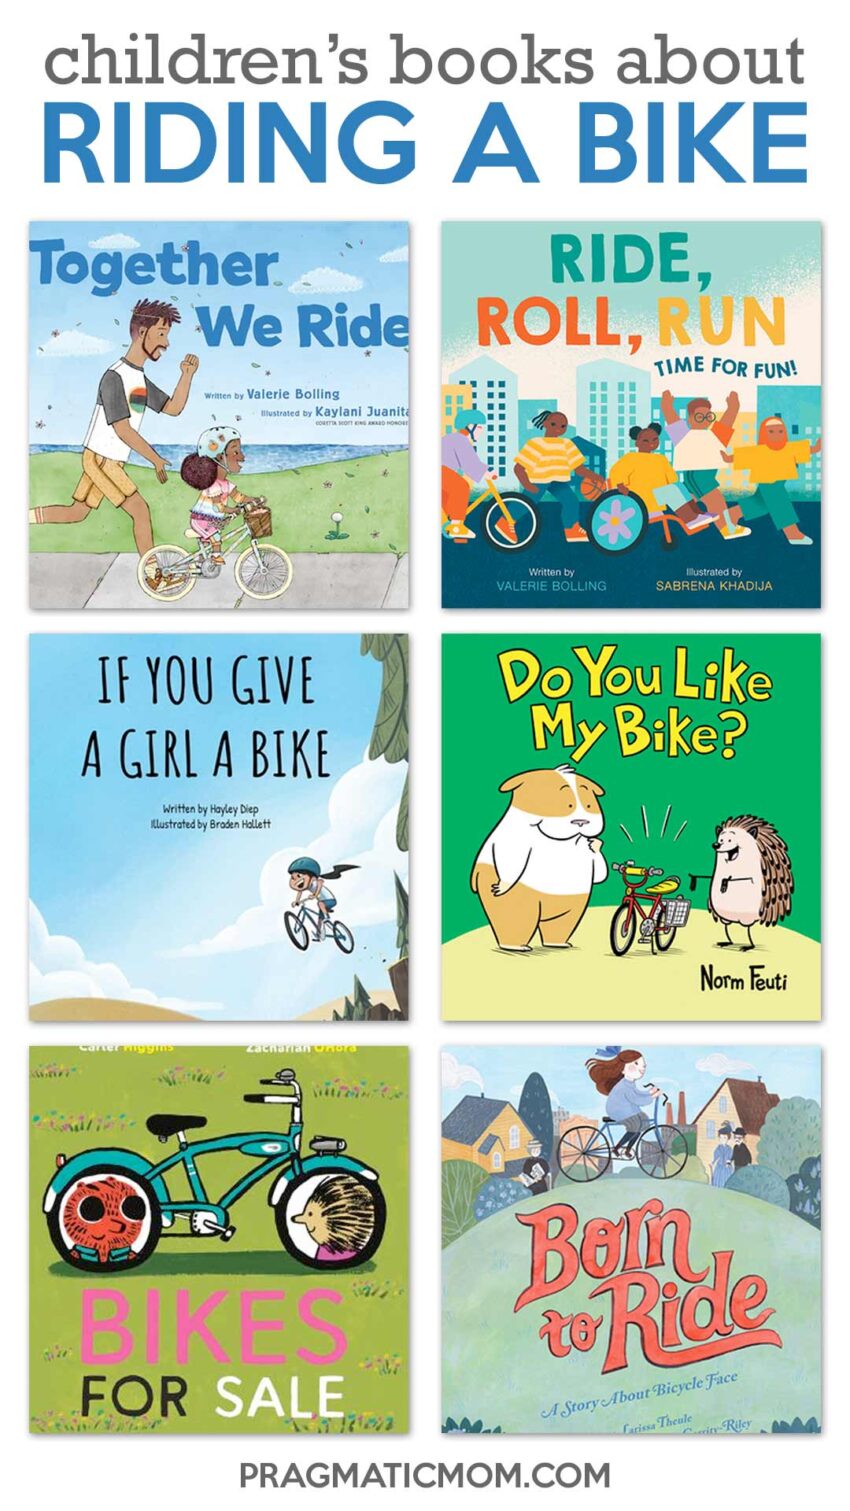 Riding a Bike Book List and GIVEAWAY!